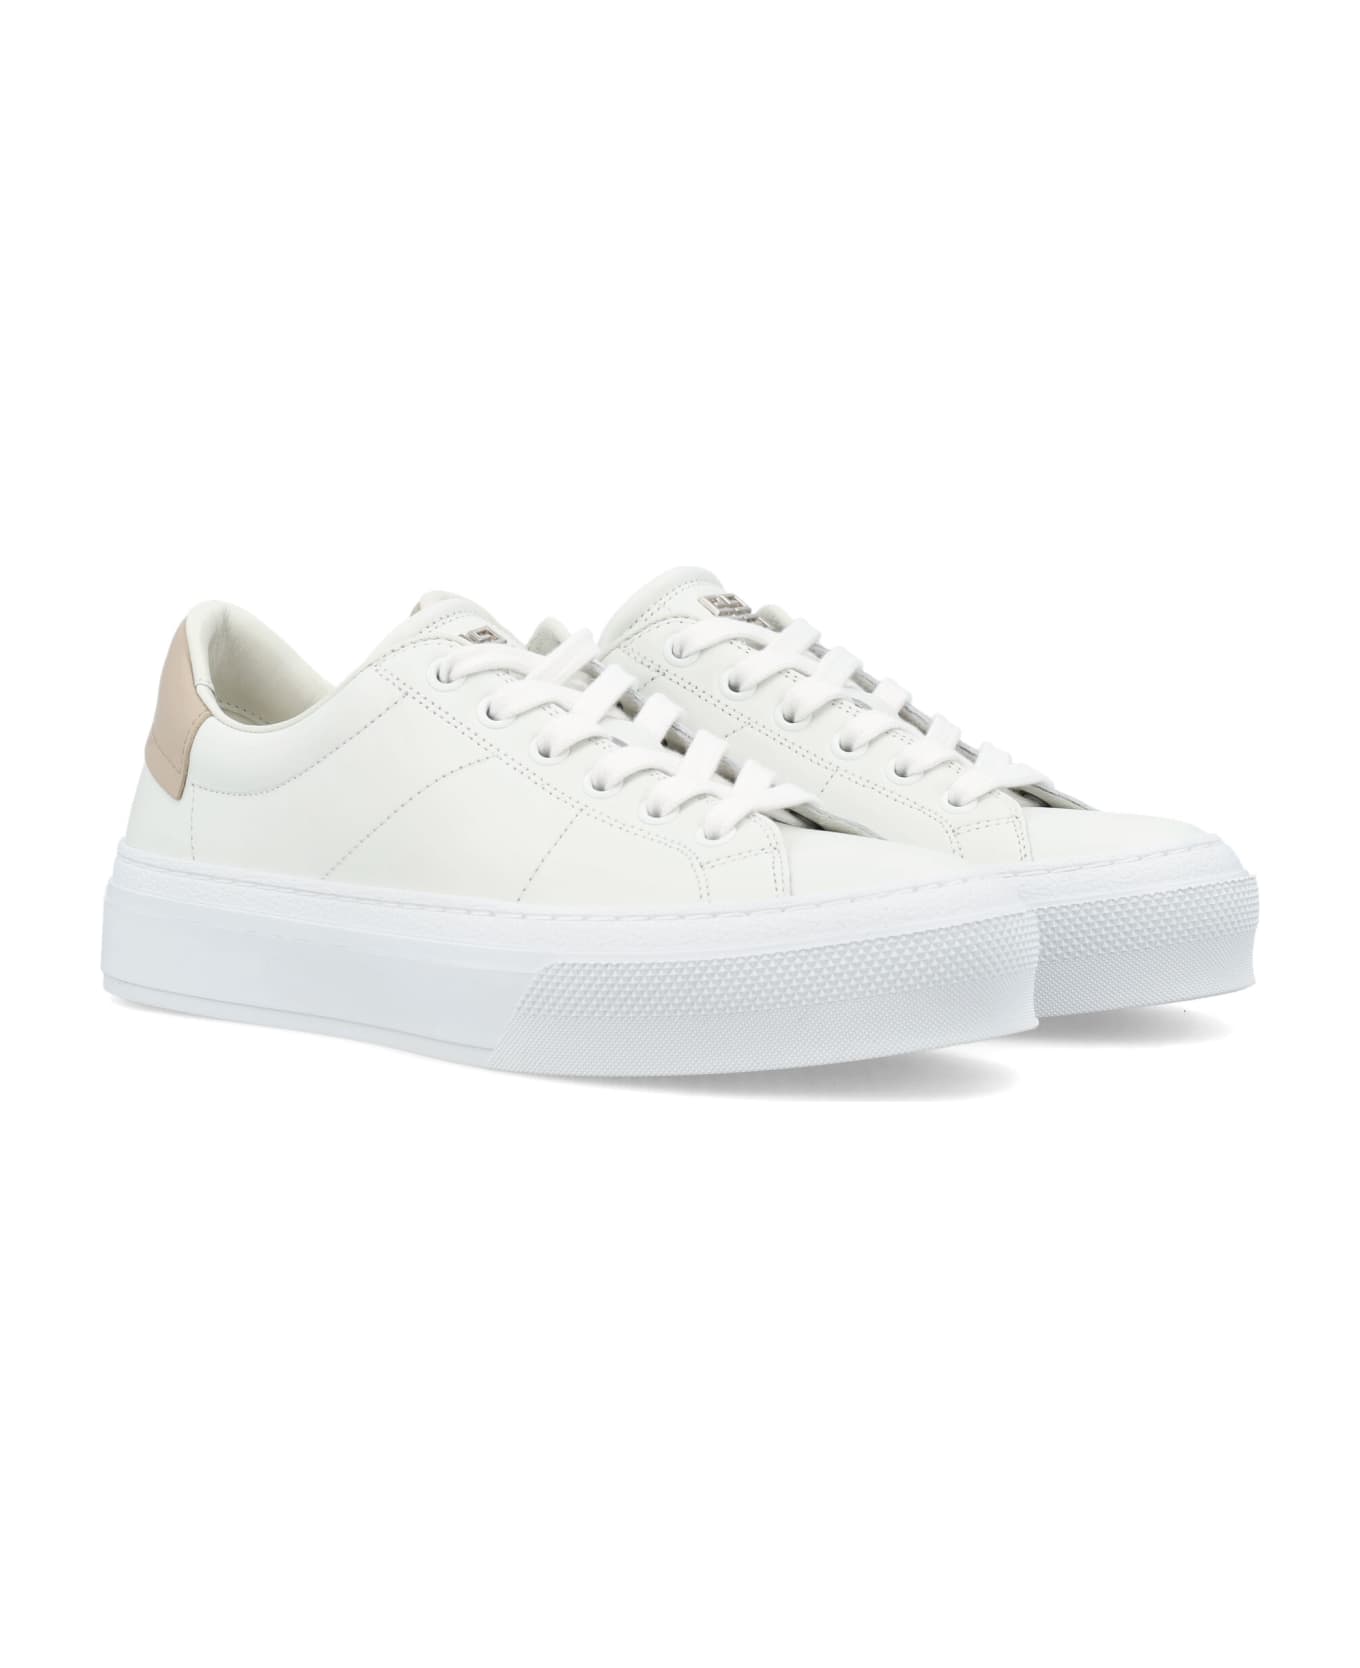 Givenchy City Sport Lace-up Sneakers - WHITE/BEIGE